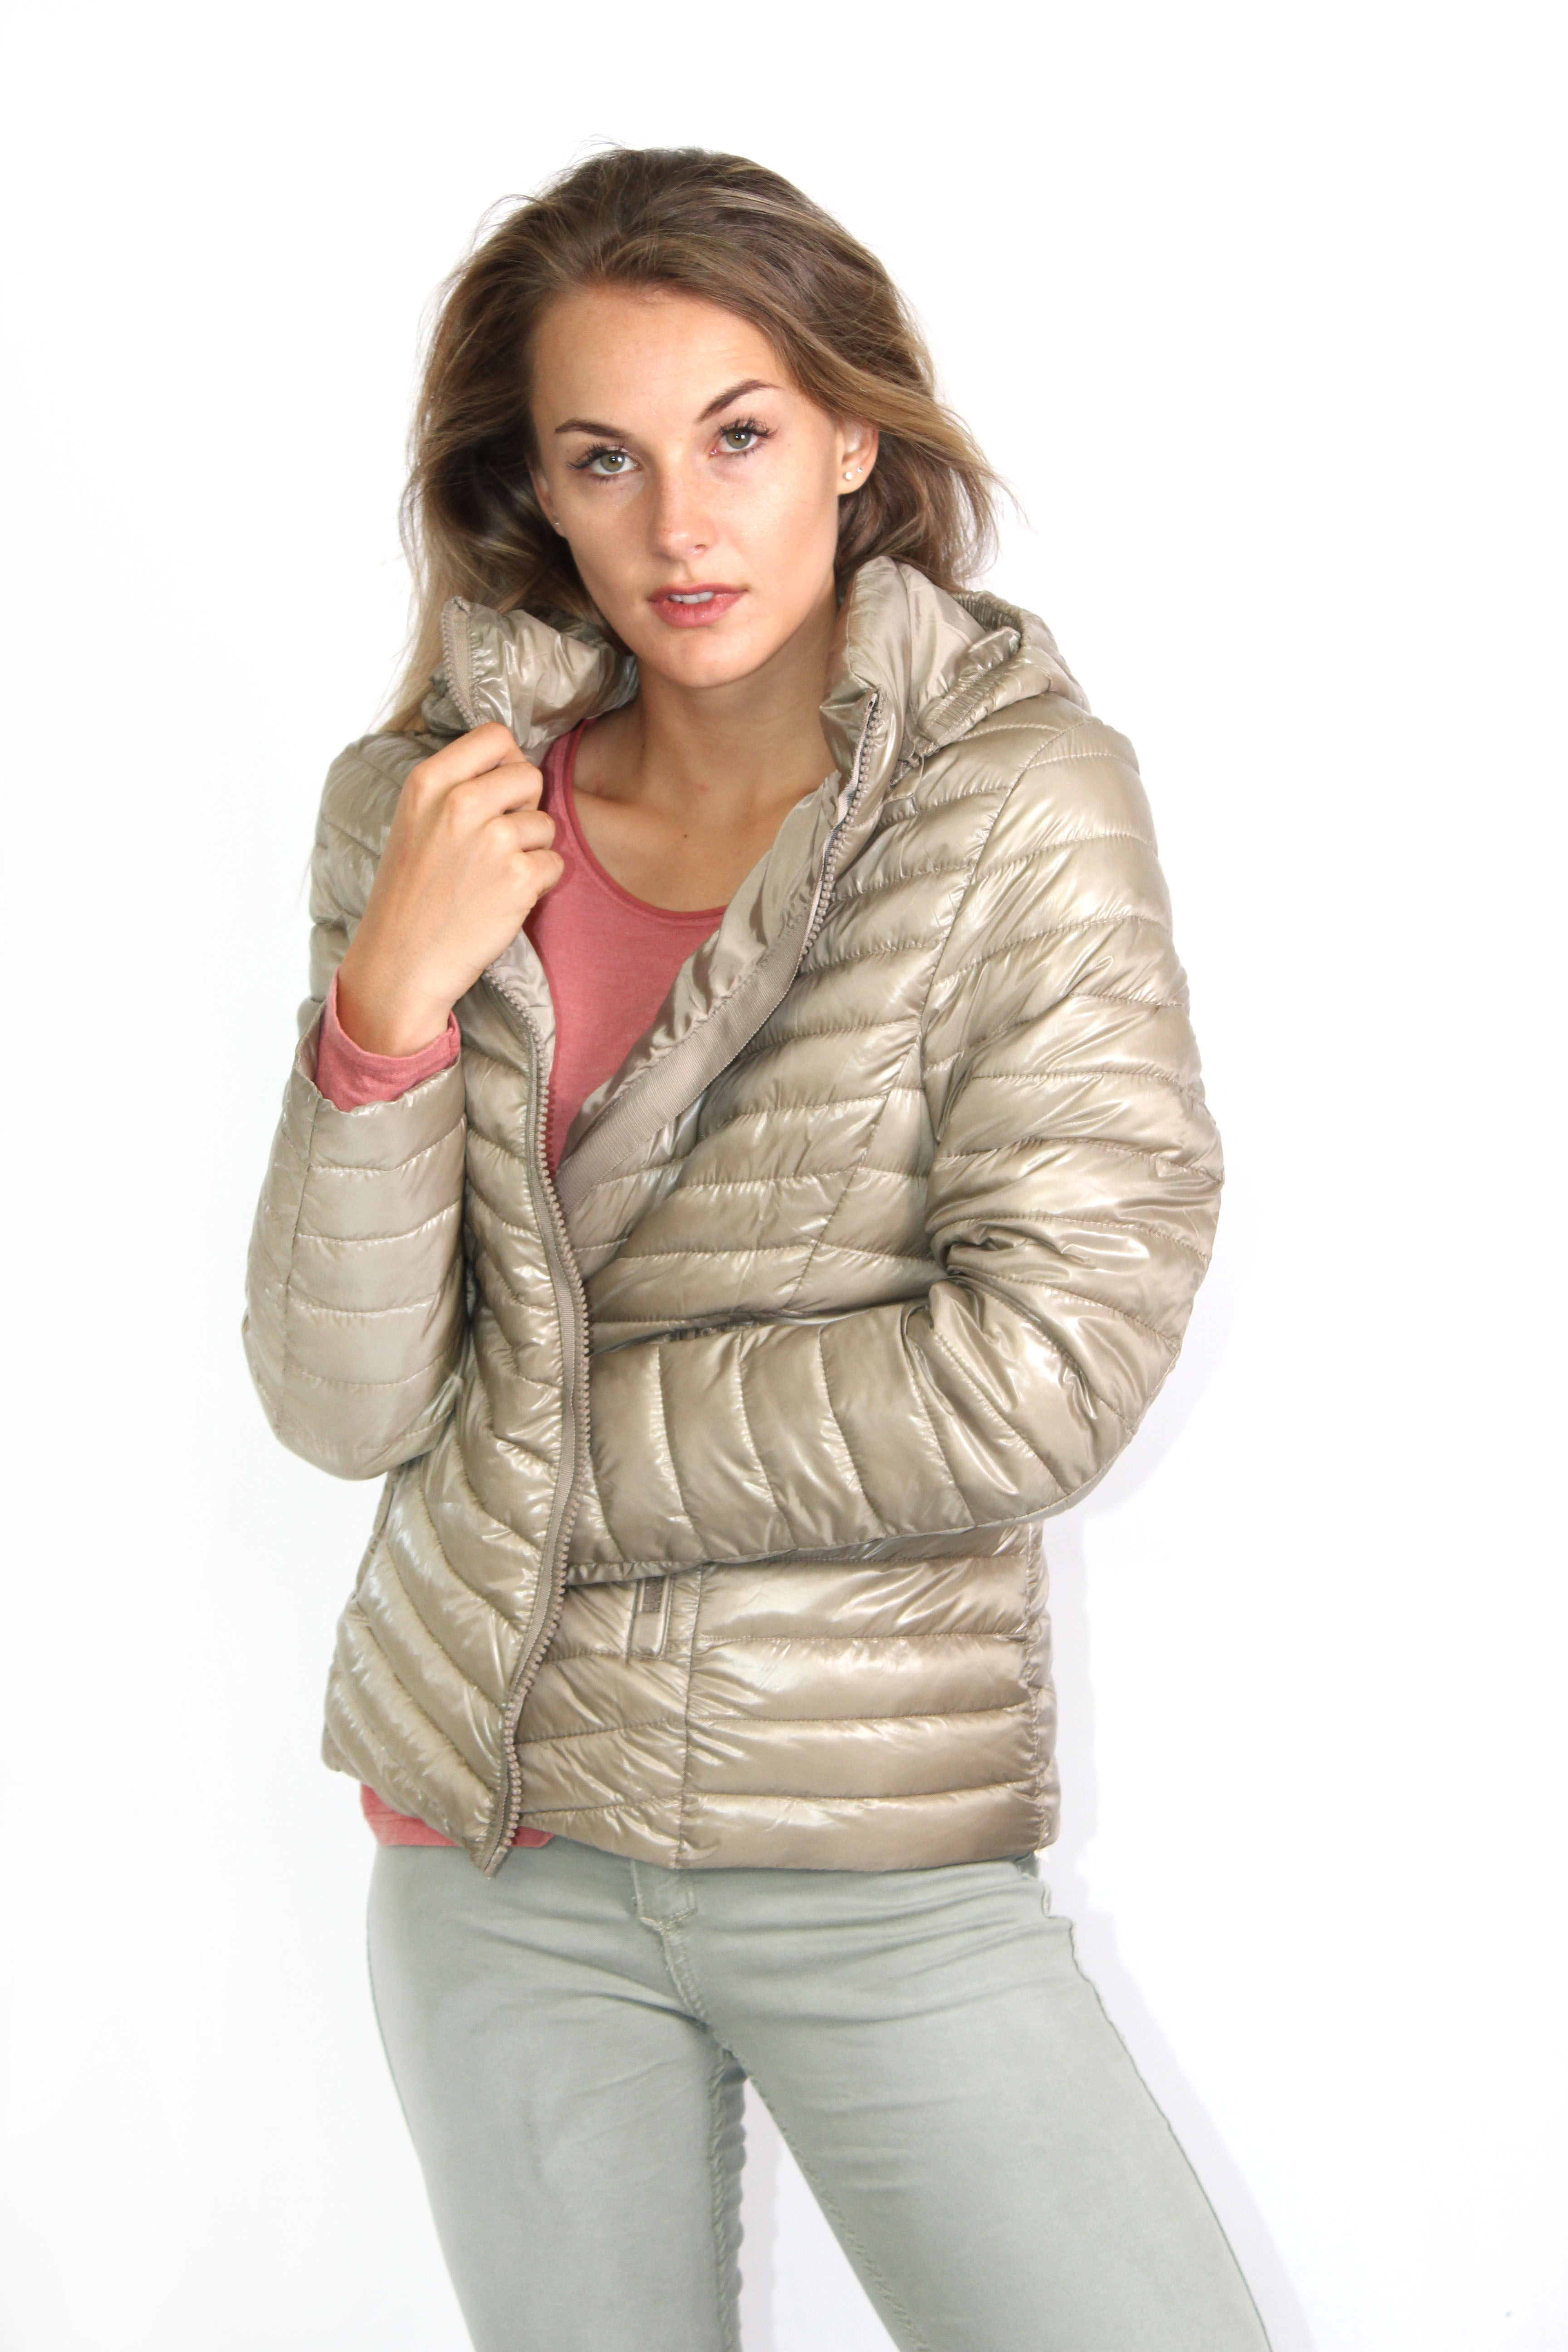 MADE IN ITALY BEIGE PUFFER JACKET | Rosella - Style inspired by elegance